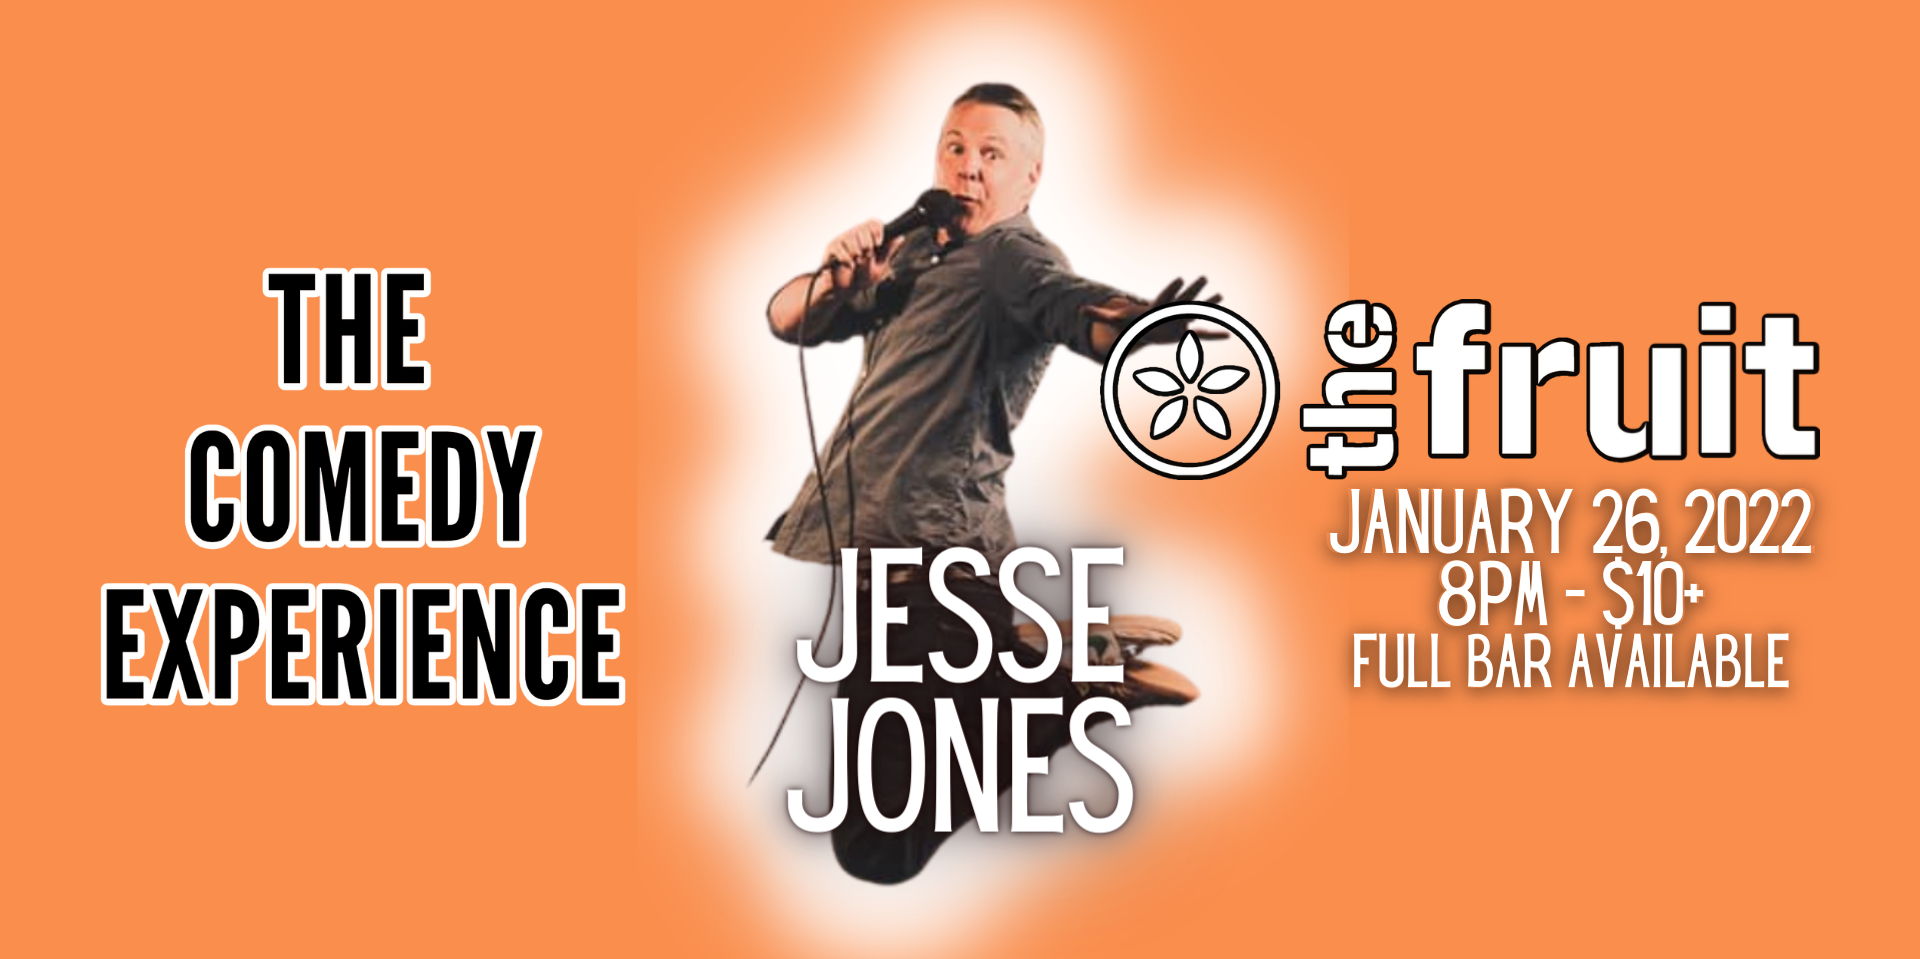 The Comedy Experience: JESSE JONES @ The Fruit in Durham promotional image